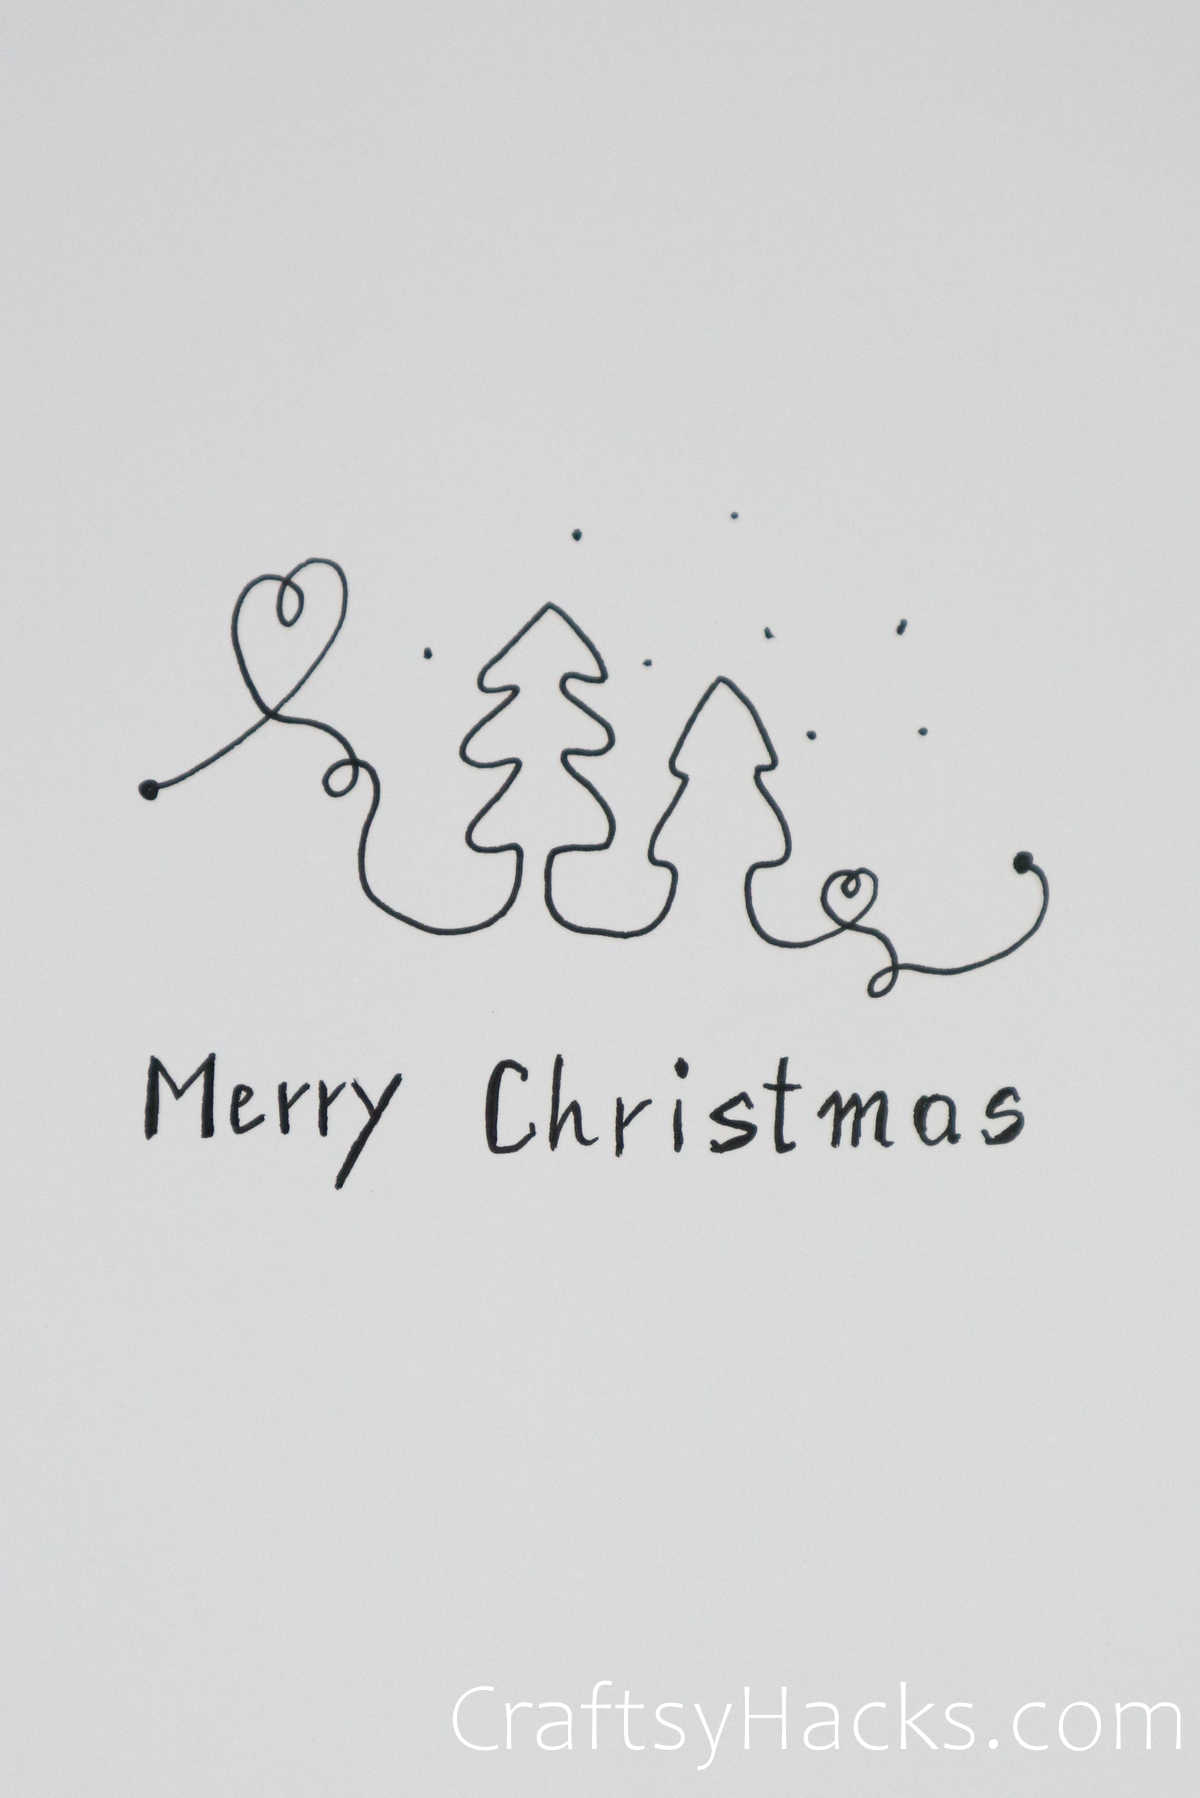 Merry Christmas Wreath Watercolor Drawing On White Paper Background,  Christmas Greeting Card Background Stock Photo, Picture and Royalty Free  Image. Image 86861380.